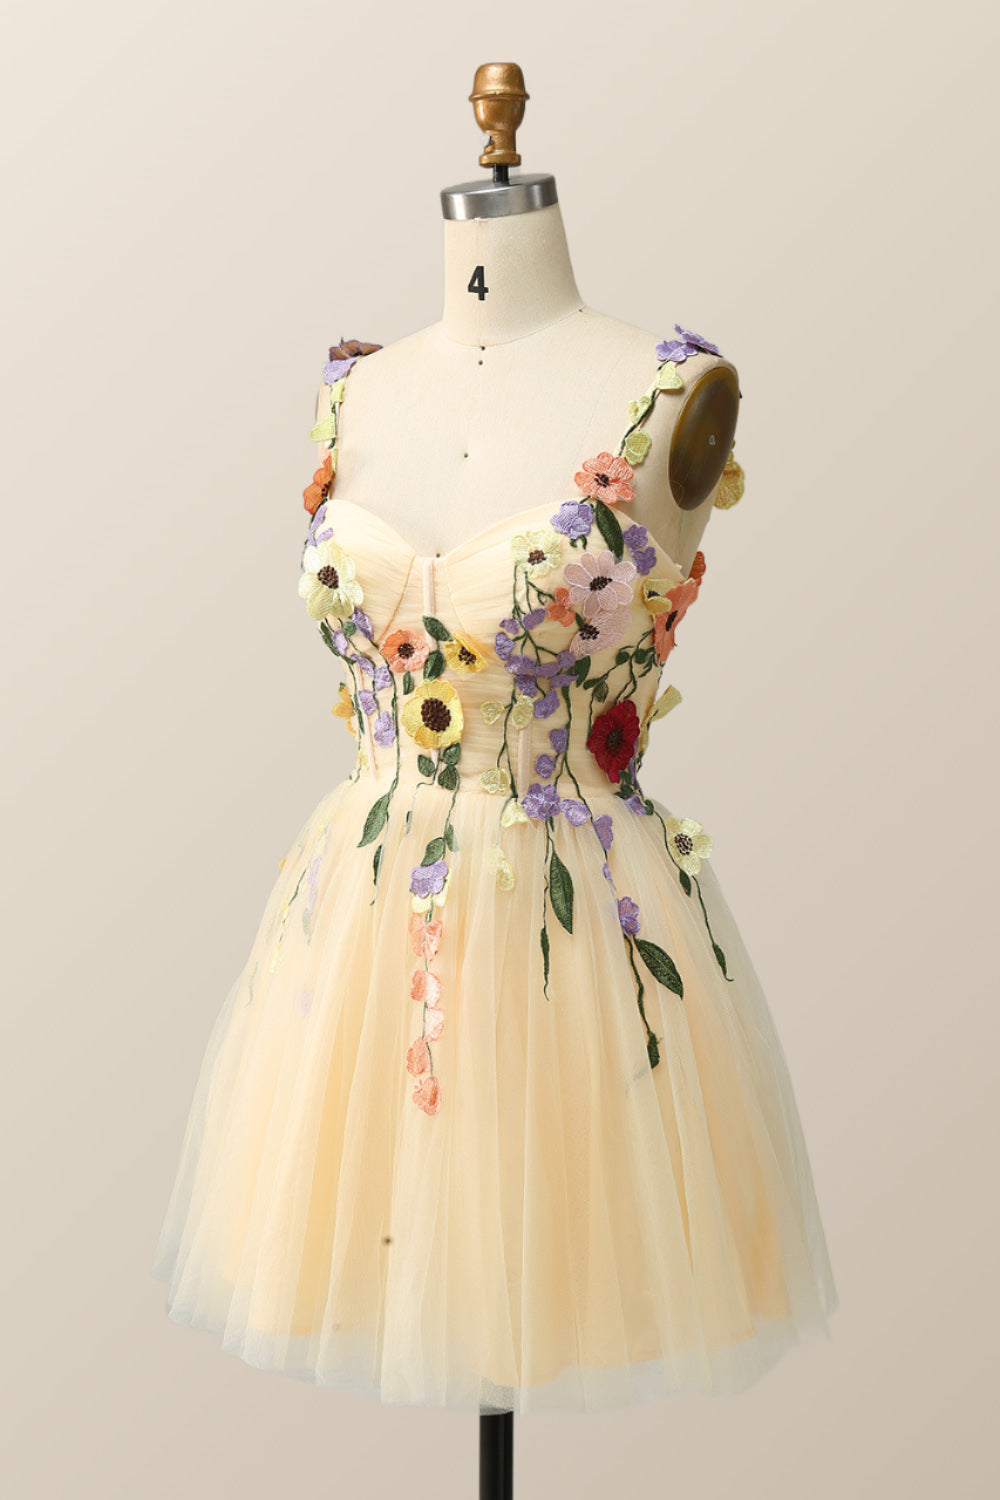 Floral Embroidered Champagne Tulle Short Homecoming Dress